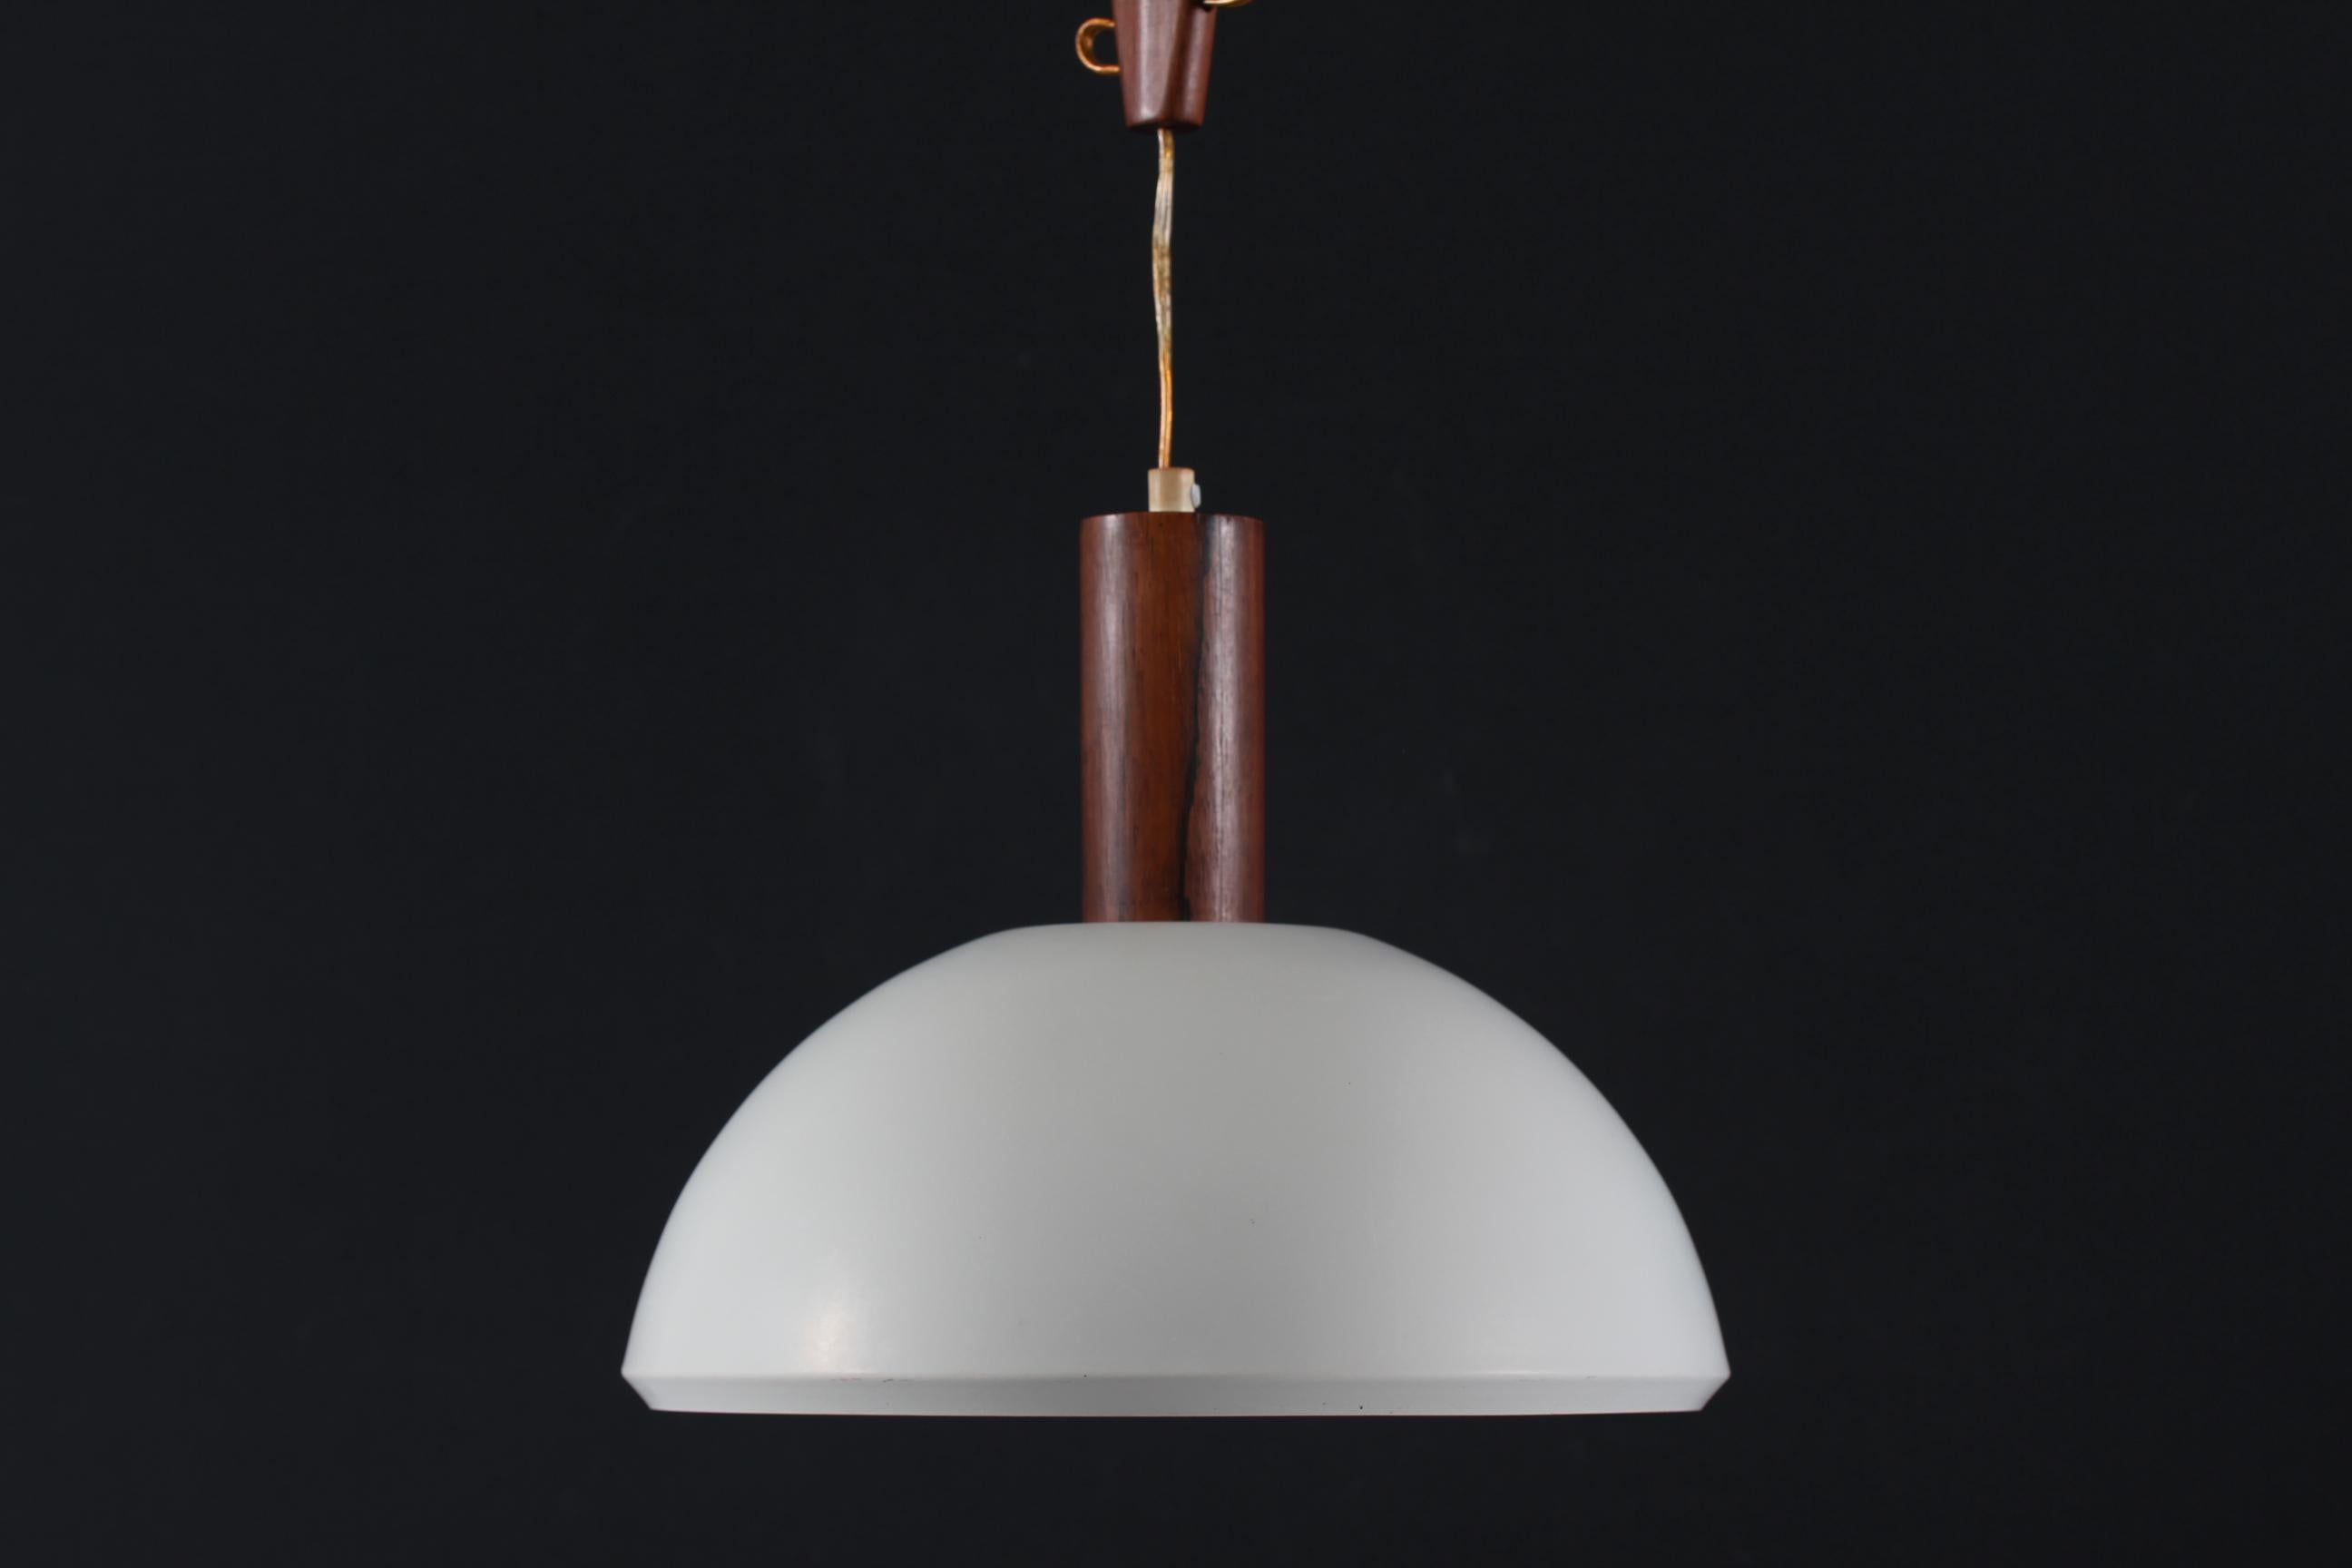 Rare Danish vintage ceiling lamp/pendent light designed by Svend Aage Holm Sørensen, with adjustable stem made of rosewood. The shade is made of metal with matte white lacquer and with a plastic grid.
Made in Denmark mid-century

Measures: